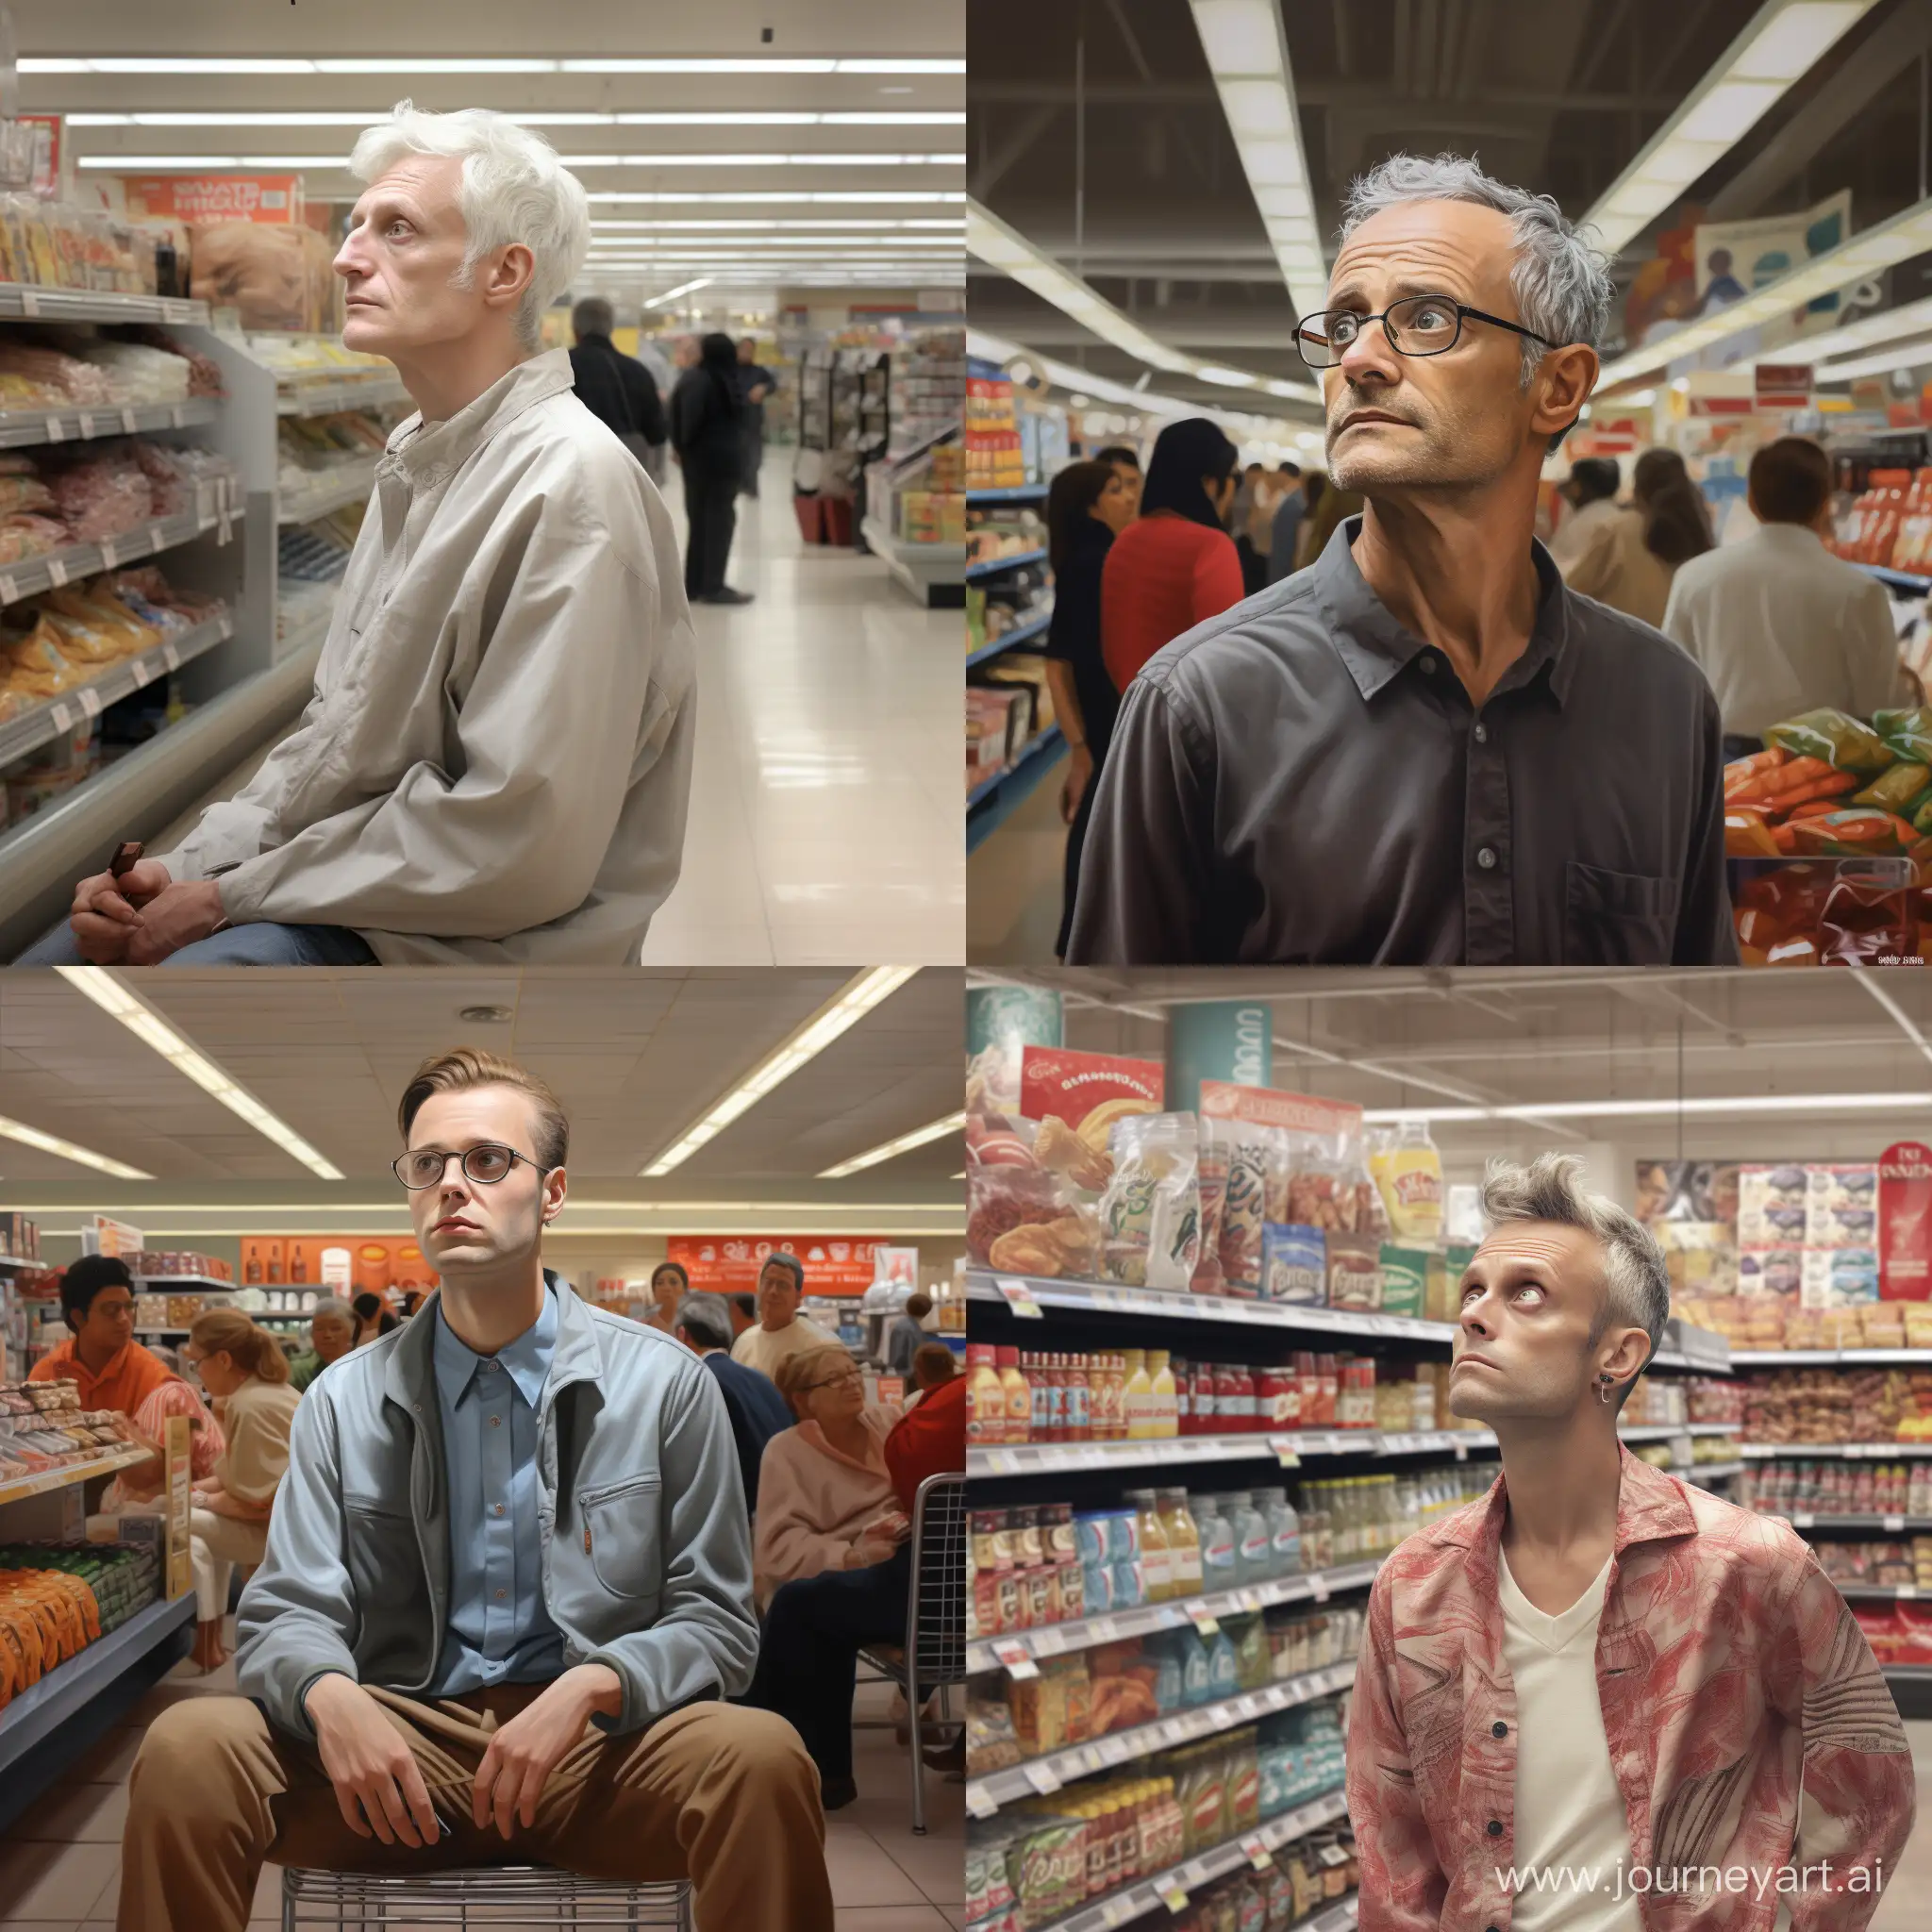 create a portrait of a fictional Neronian subject watching customers in a supermarket to make sure they don't steal merchandise, [neurographics],photorealism, humor--6:9